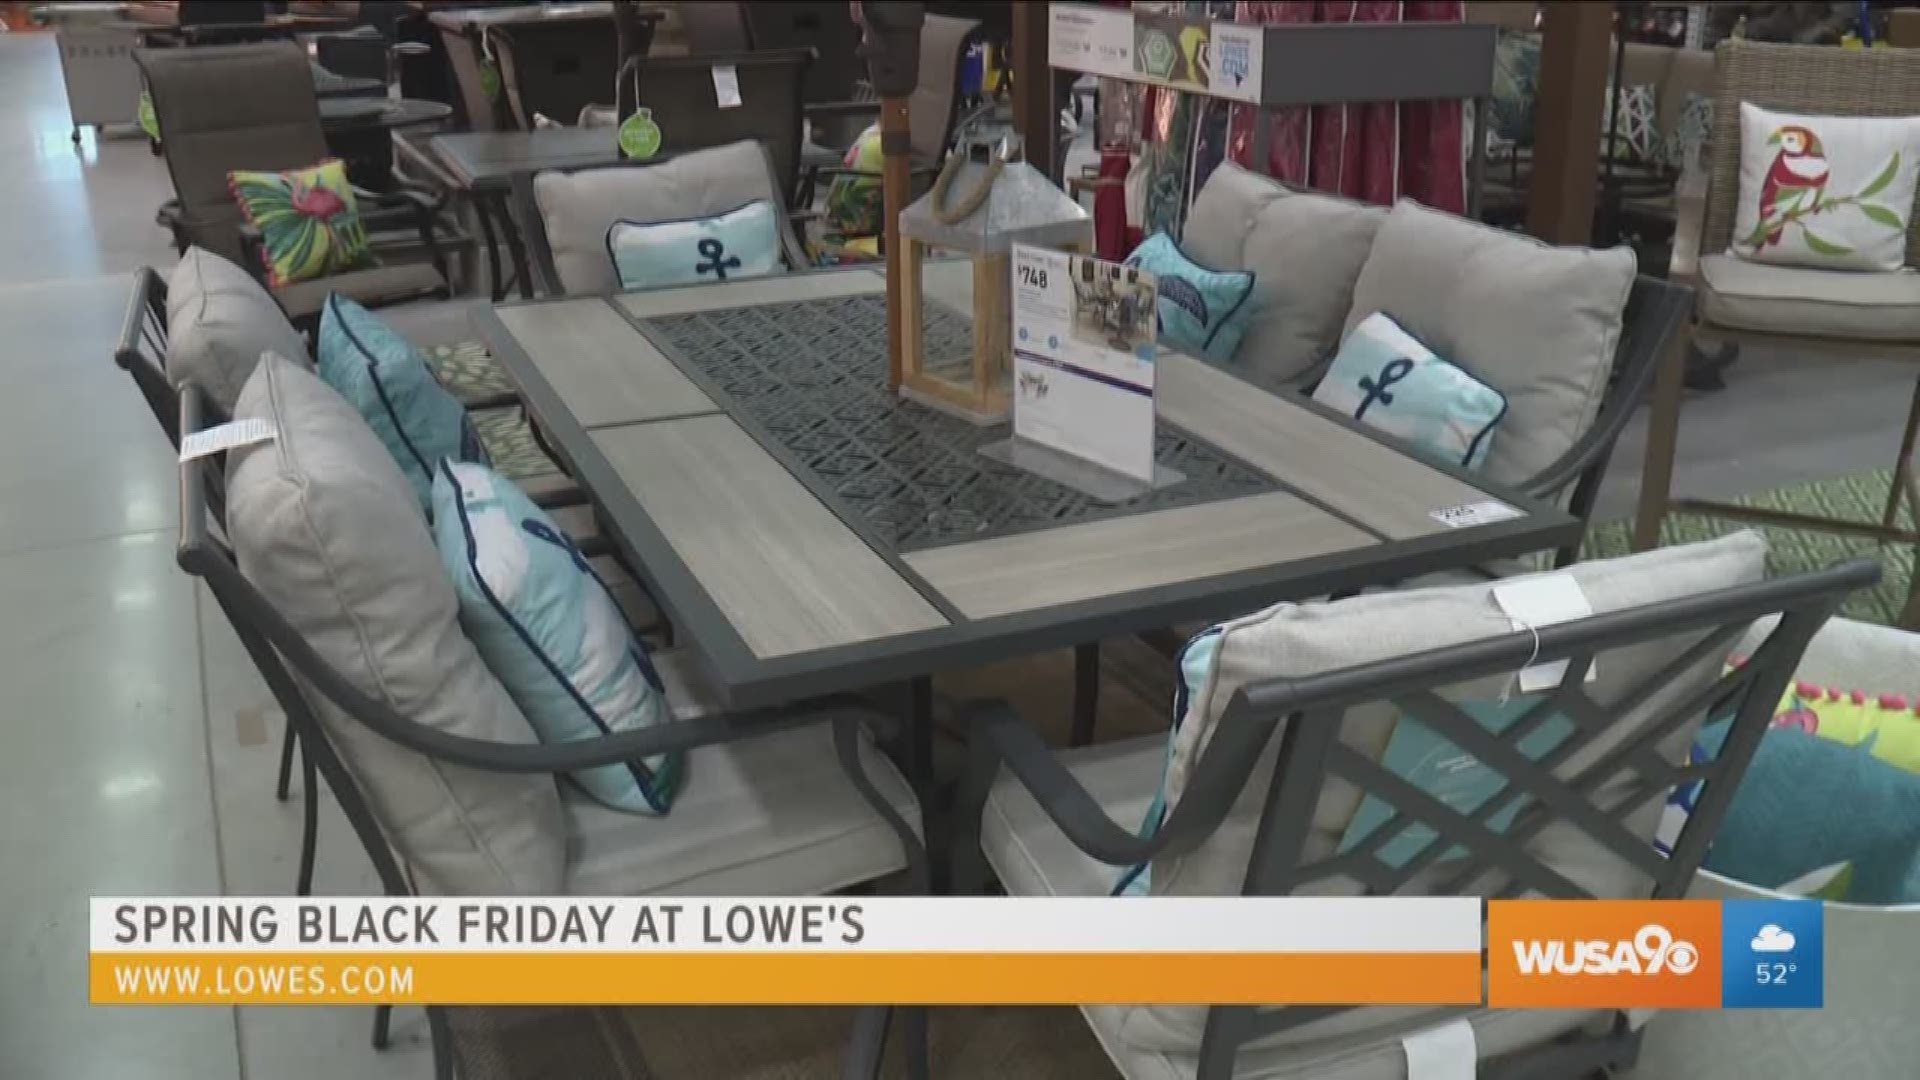 Enjoy your spring outdoors with the family.  Take advantage of the Spring Black Friday at Lowe's and save money on your new outdoor furniture.  For more information visit www.Lowes.com.